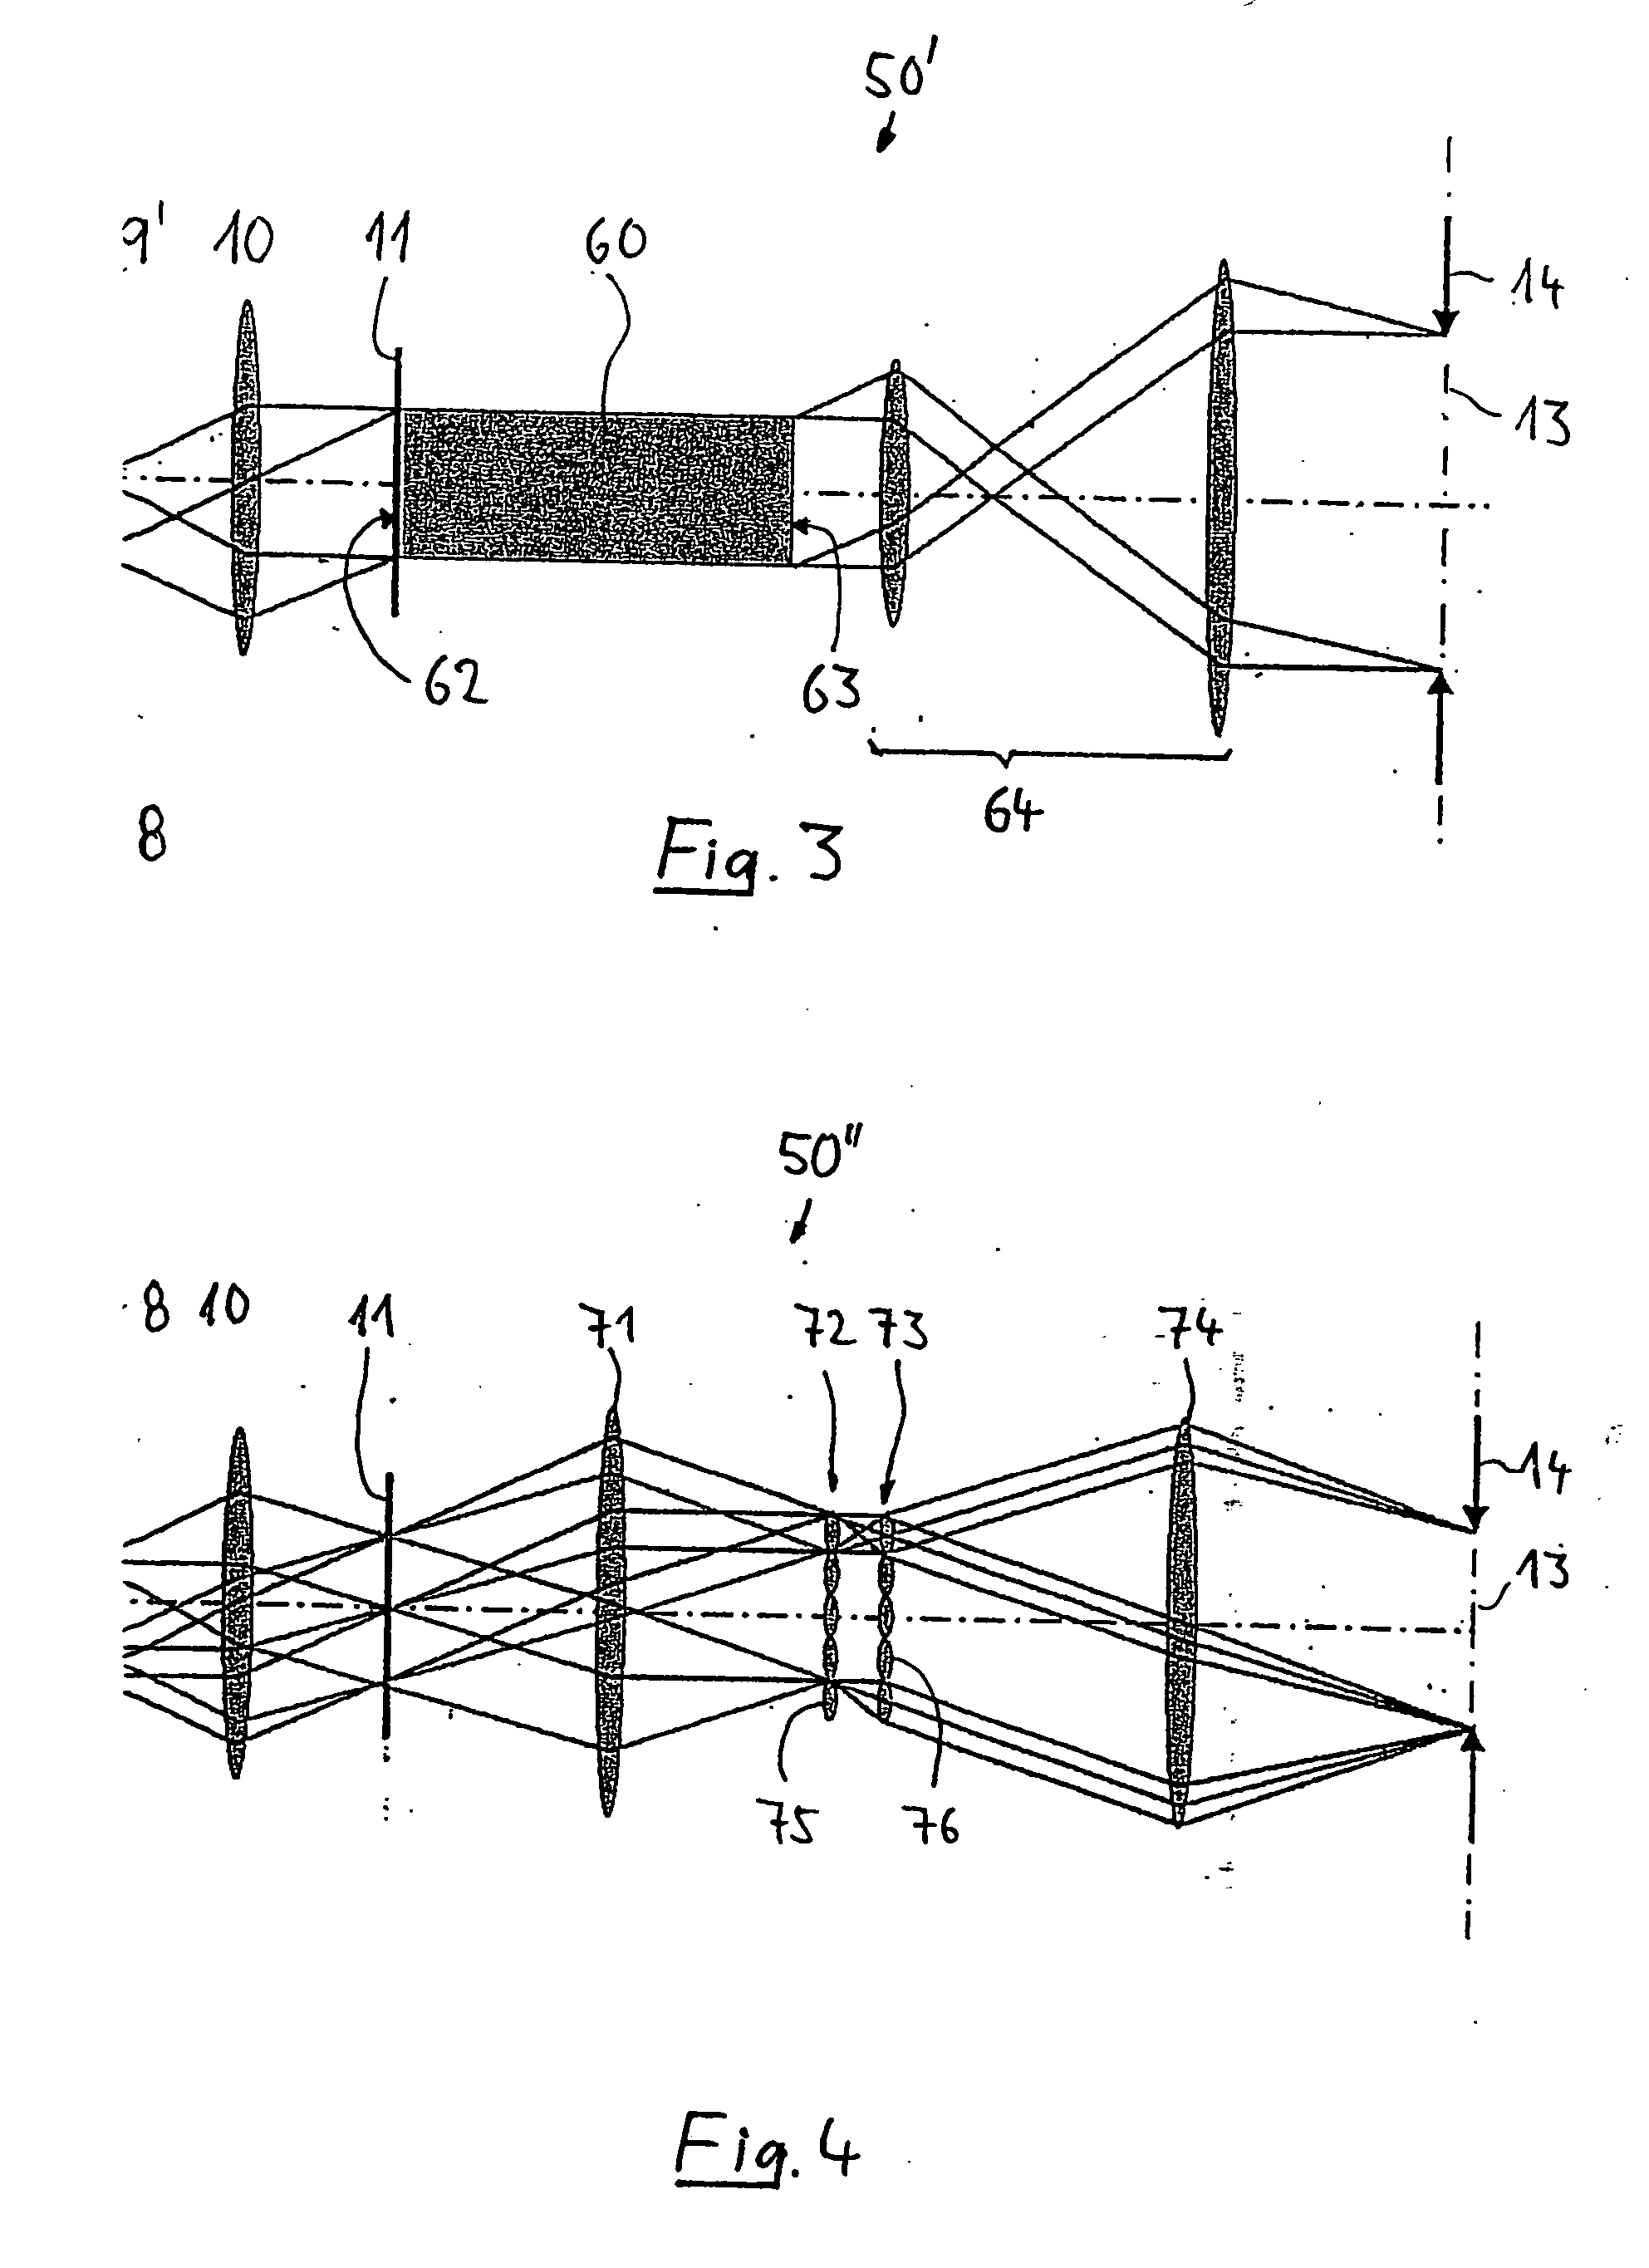 Illumination system for a microlithography projection exposure apparatus